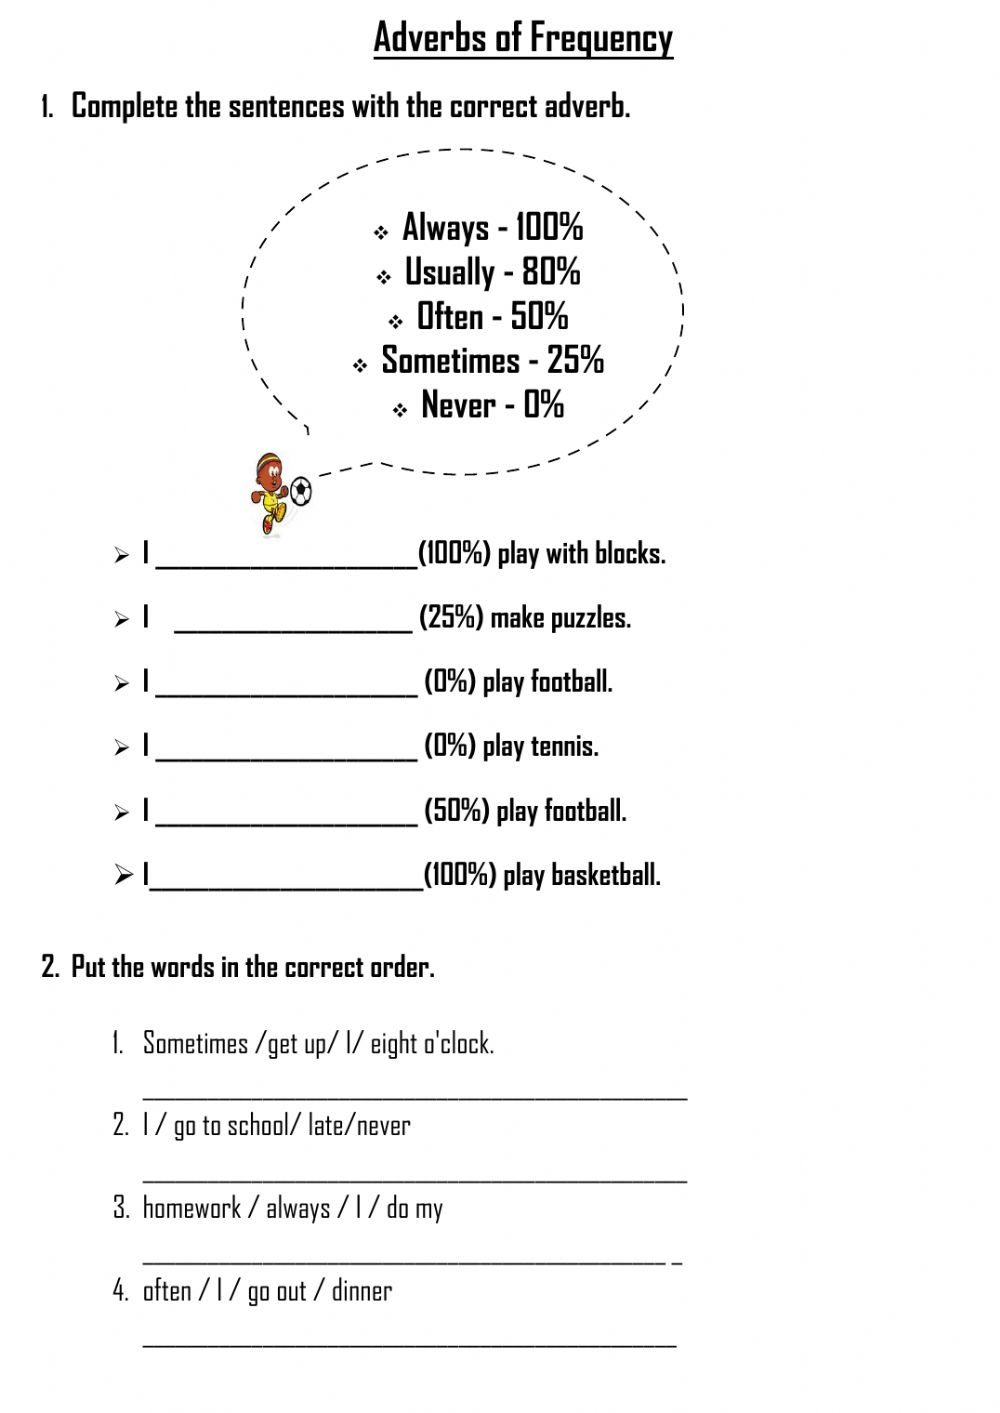 Frequency Adverbs Interactive Worksheet For Elemental